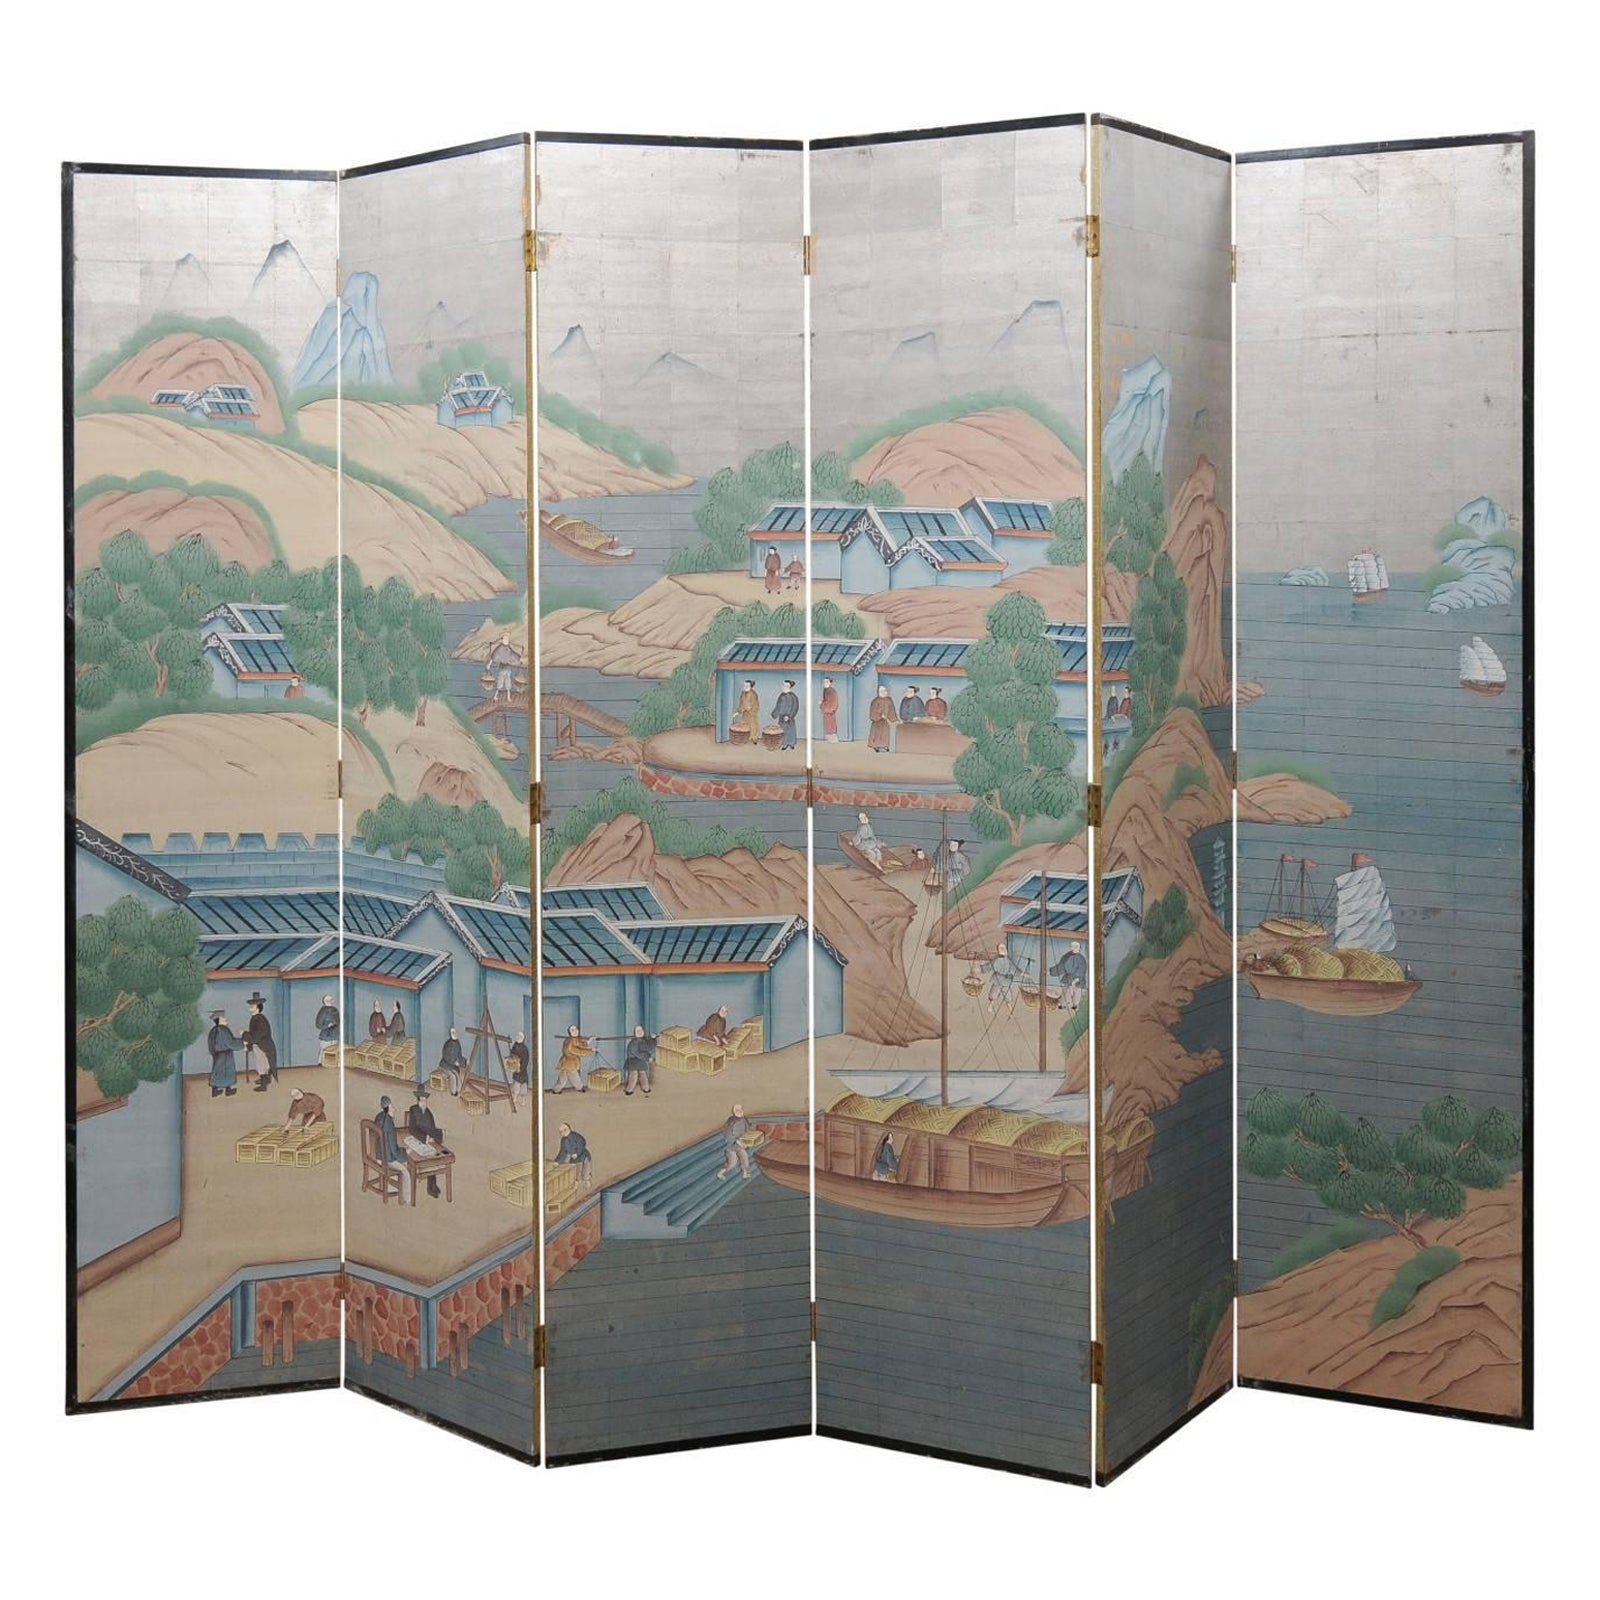 6-Panel Painted Paper Folding Screen with Chinese Scenes, Mid-20th Century